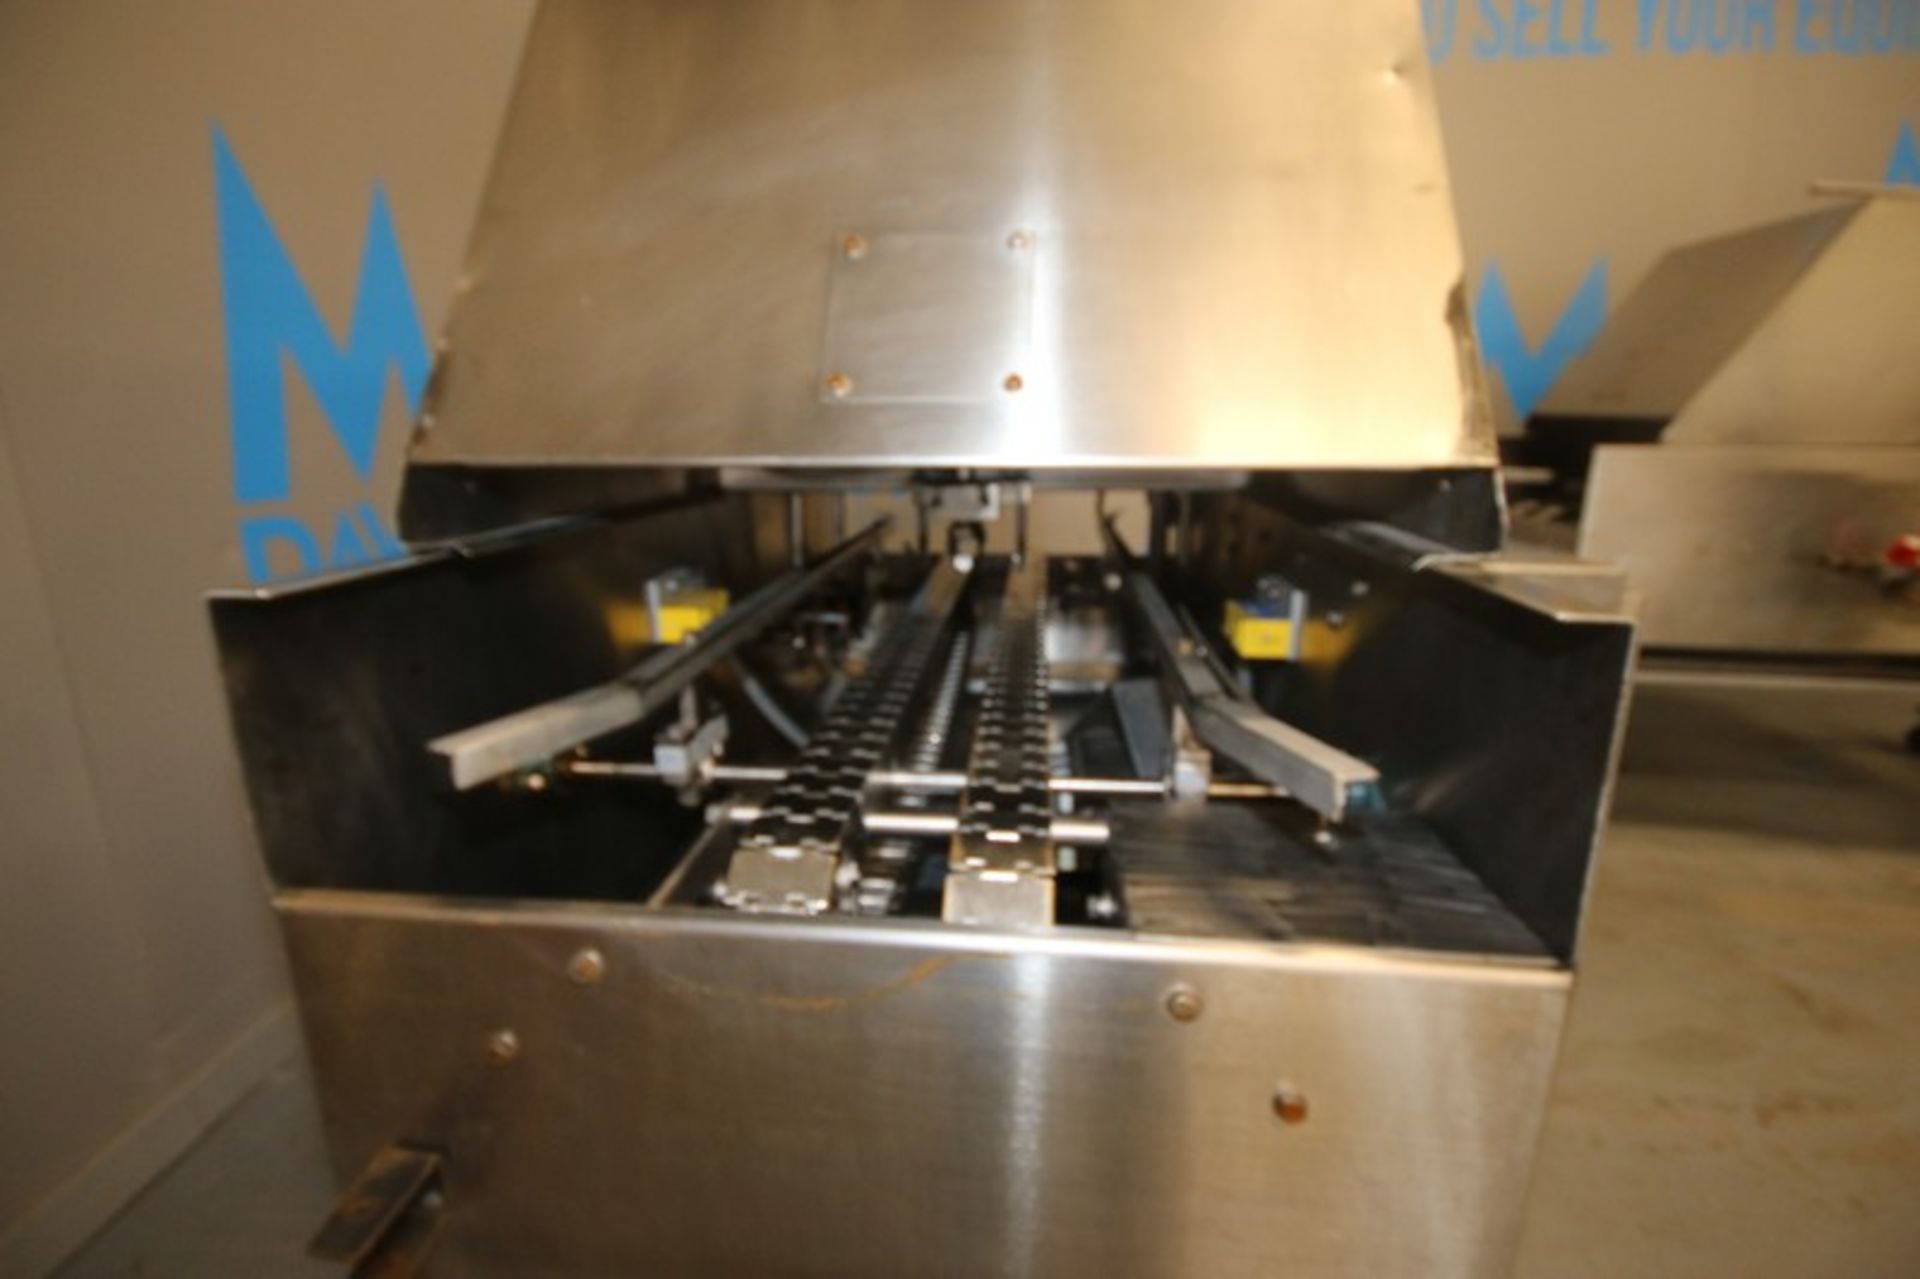 Mallet S/S Bread Pan Oiler,M/N 01A, S/N 242-456, 460 Volts, 3 Phase, Mounted on Portable Frame ( - Image 5 of 15